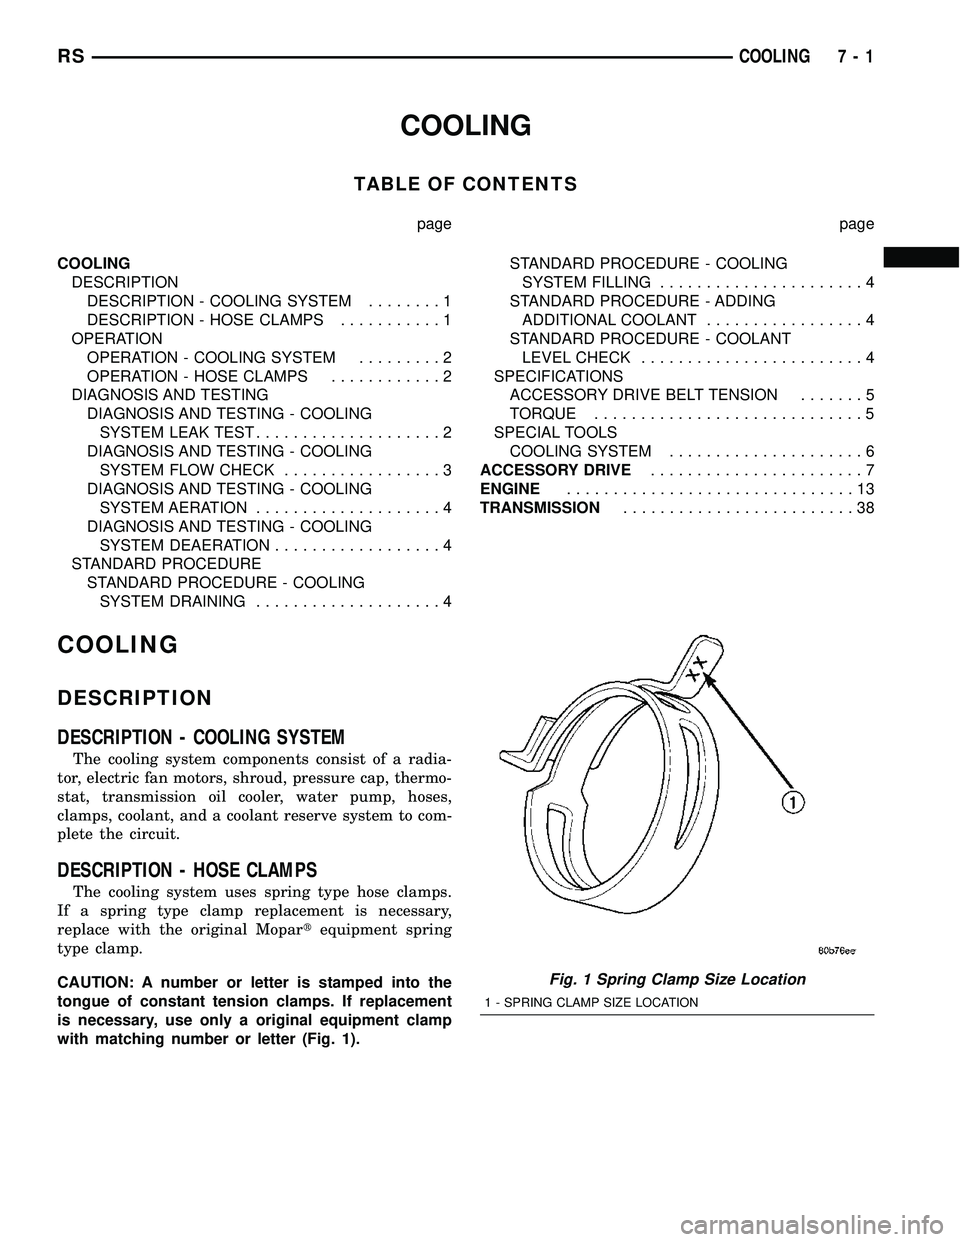 CHRYSLER VOYAGER 2005 Owners Manual COOLING
TABLE OF CONTENTS
page page
COOLING
DESCRIPTION
DESCRIPTION - COOLING SYSTEM........1
DESCRIPTION - HOSE CLAMPS...........1
OPERATION
OPERATION - COOLING SYSTEM.........2
OPERATION - HOSE CLAM